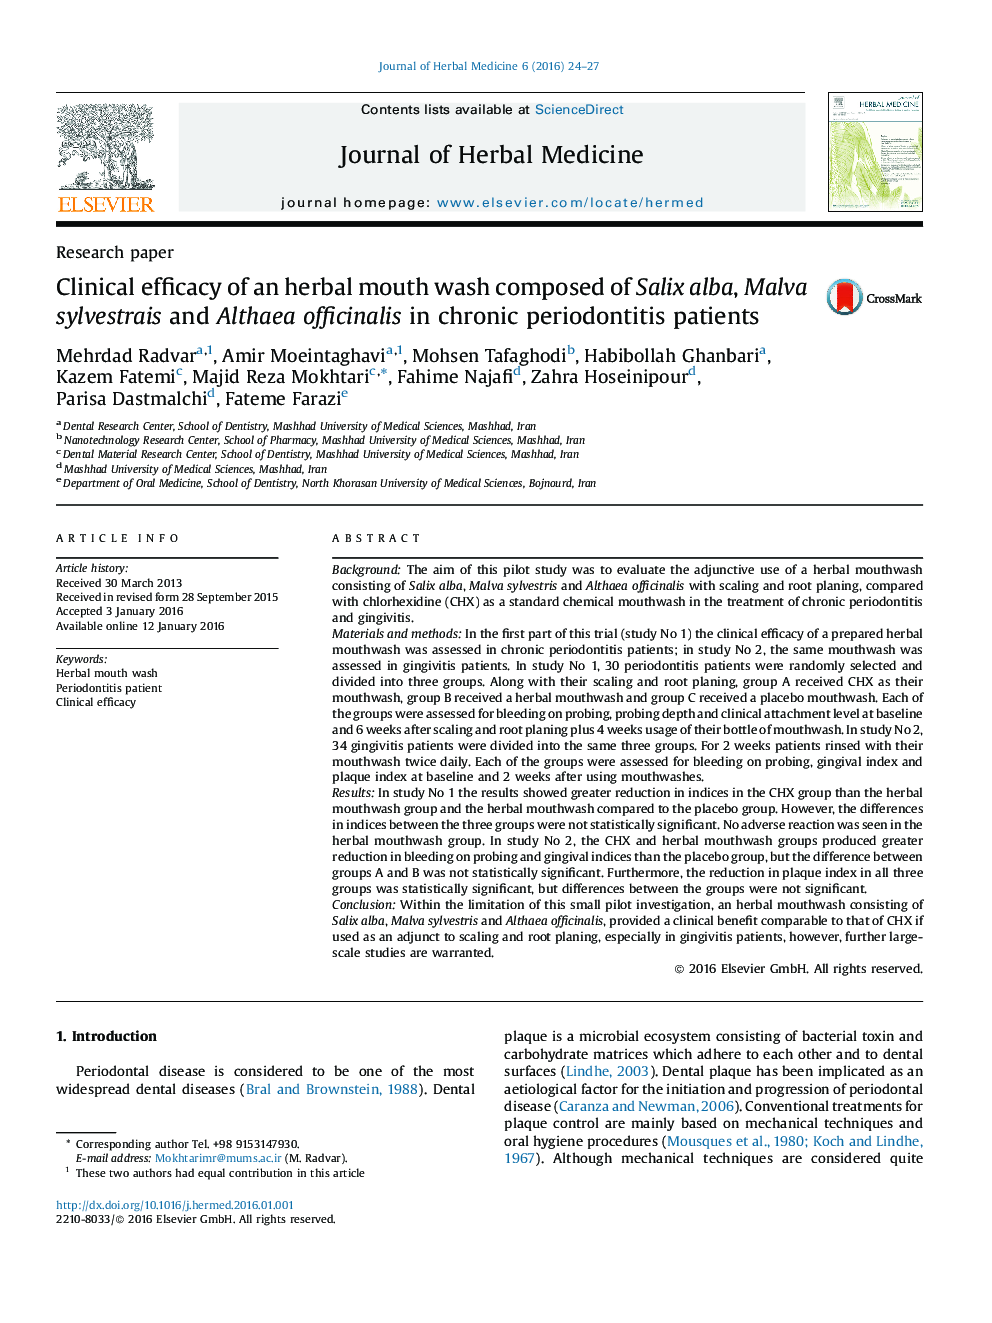 Clinical efficacy of an herbal mouth wash composed of Salix alba, Malva sylvestrais and Althaea officinalis in chronic periodontitis patients